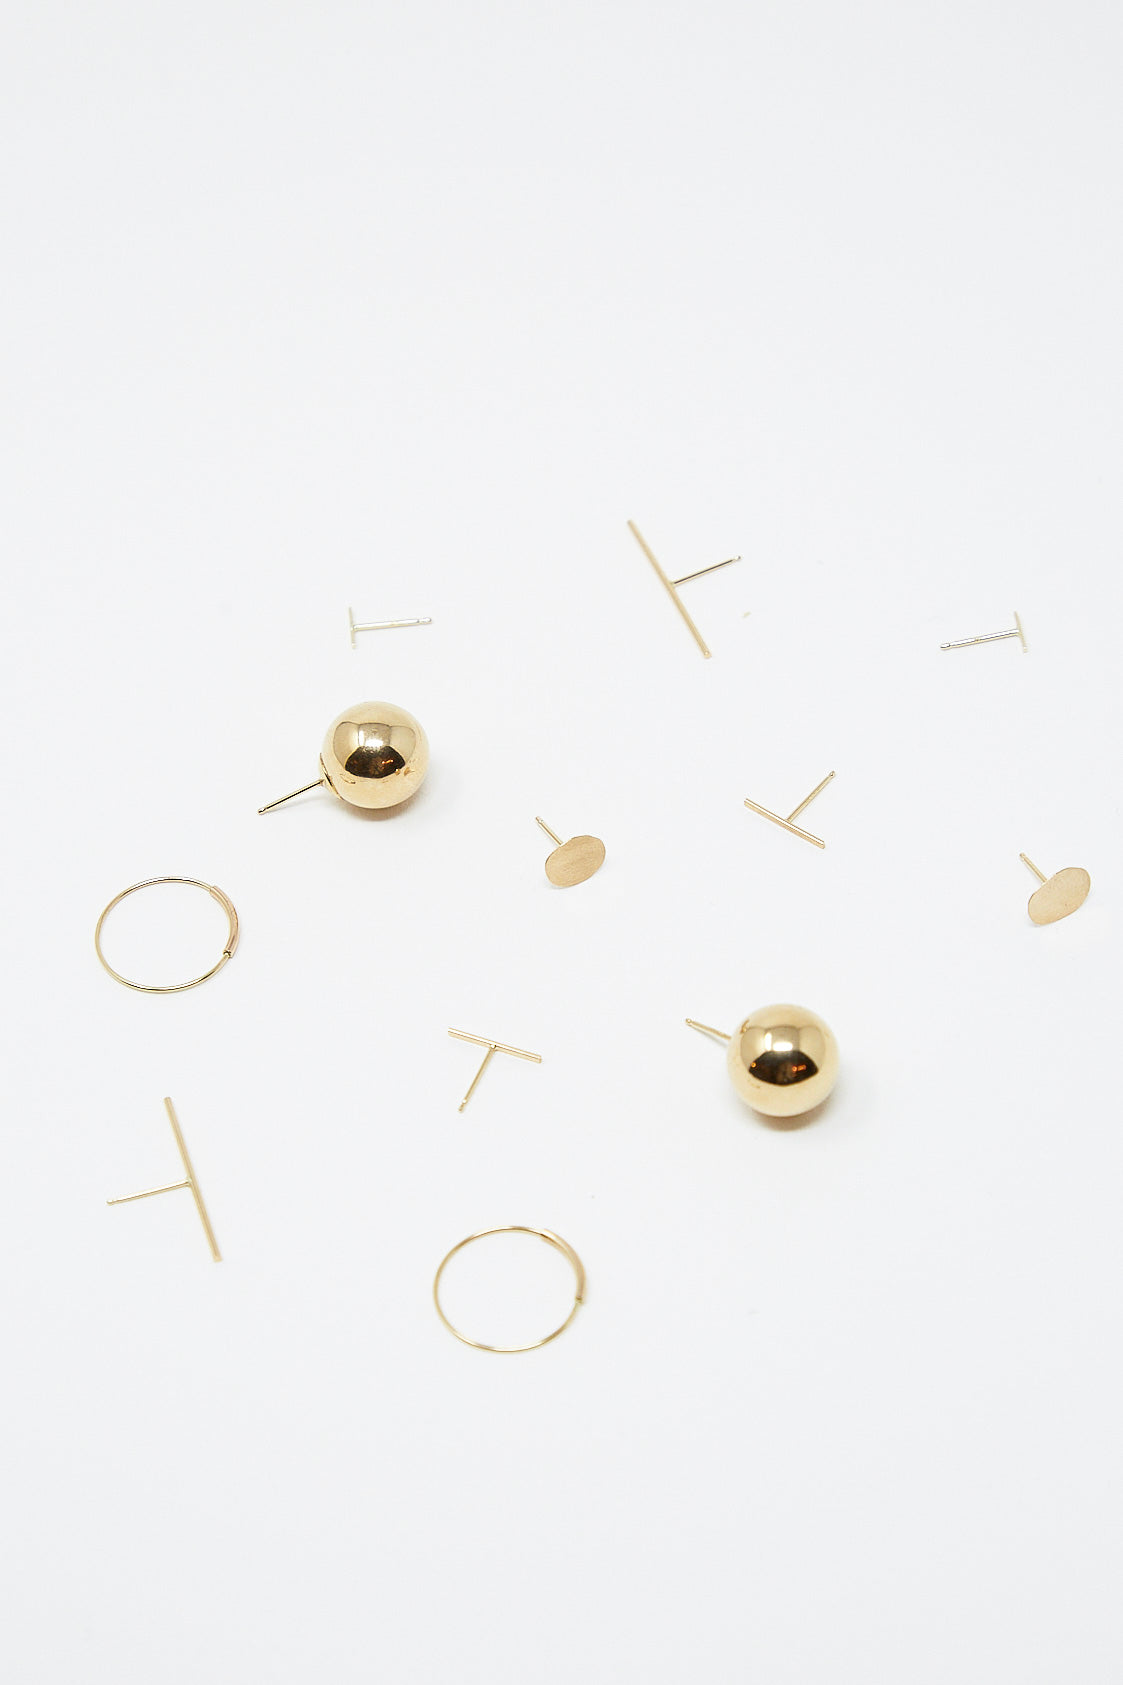 A collection of Kathleen Whitaker Stick Stud 1" Single Earrings in 14K Yellow Gold on a white surface.